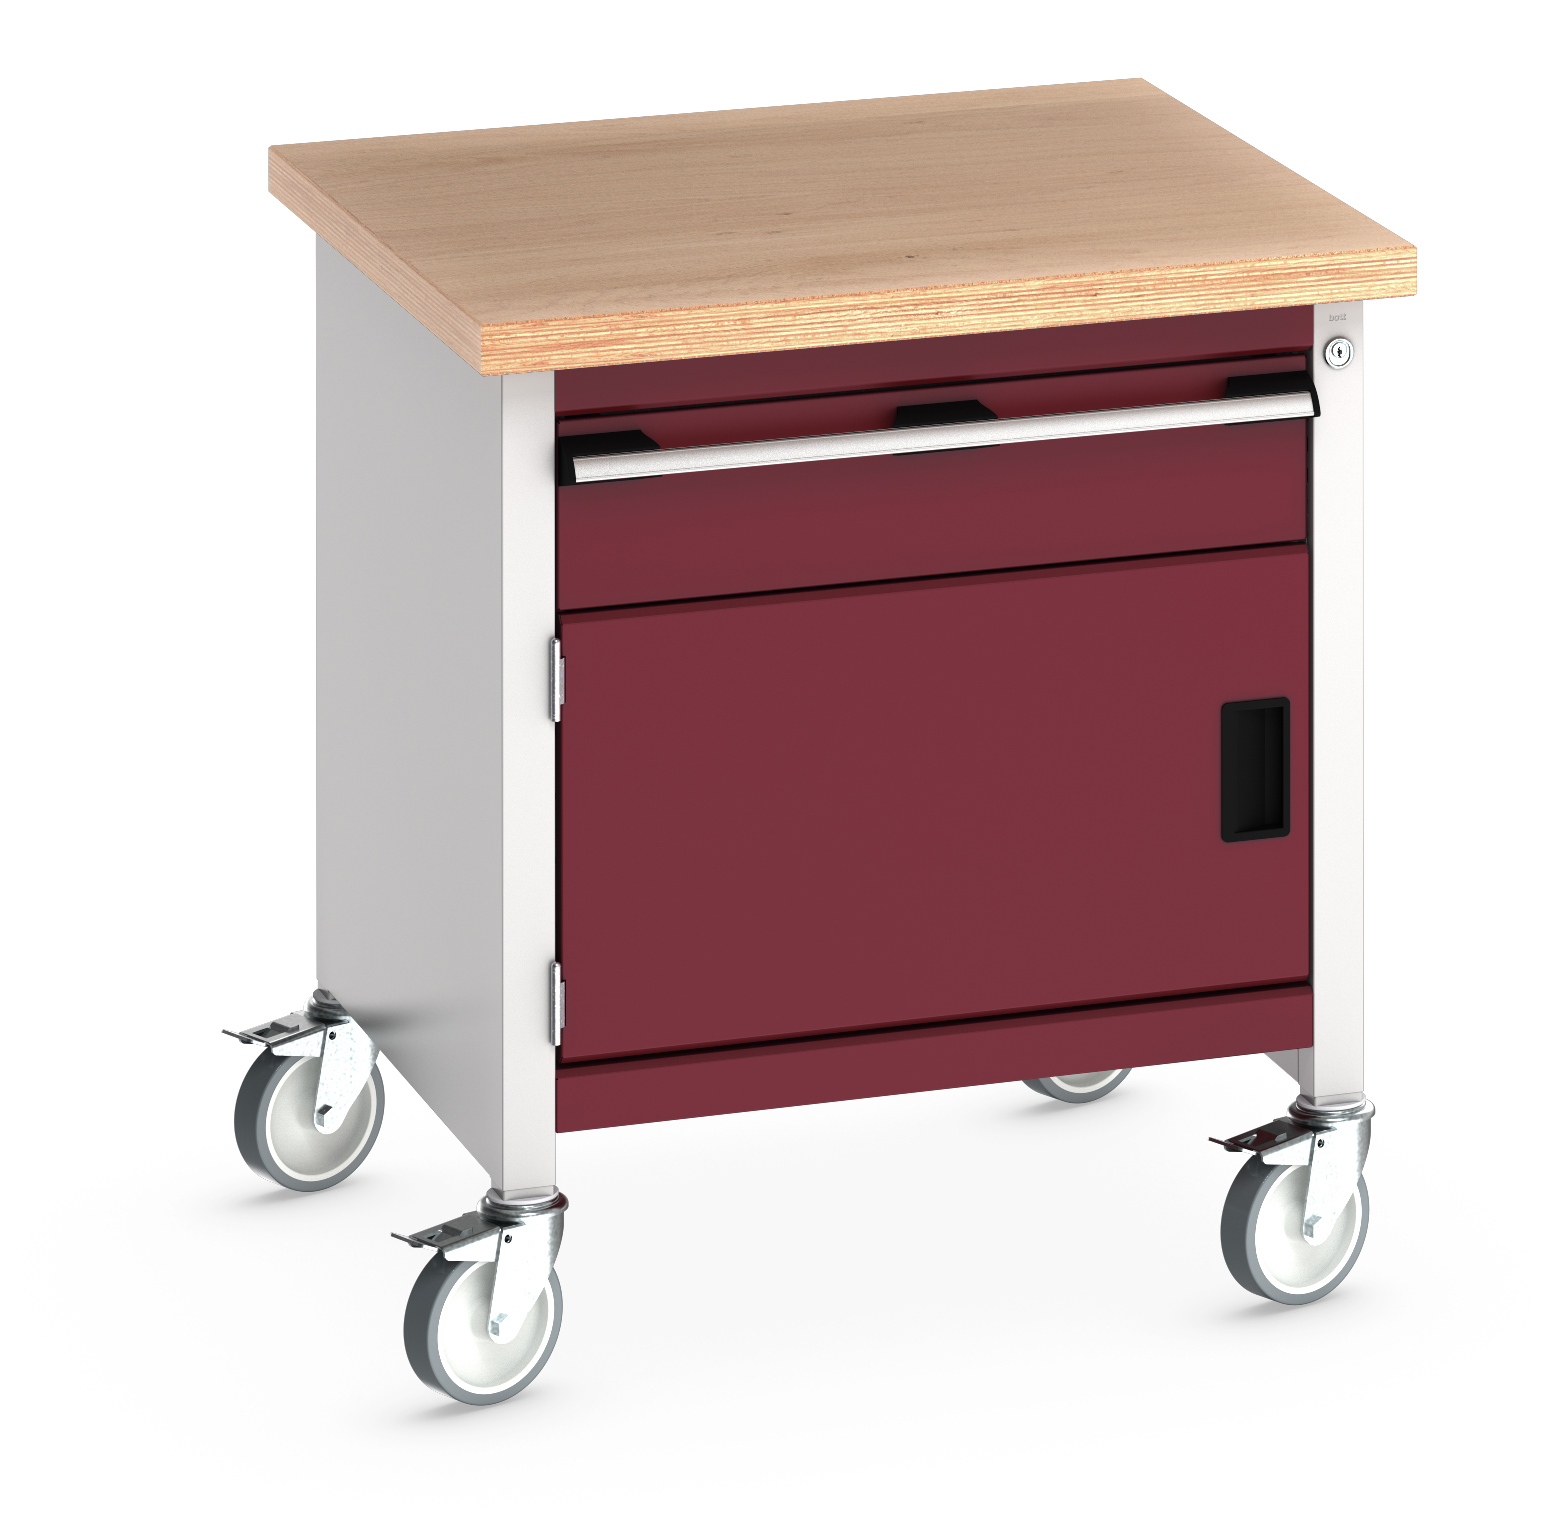 Bott Cubio Mobile Storage Bench With 1 Drawer - Full Cupboard - 41002088.24V